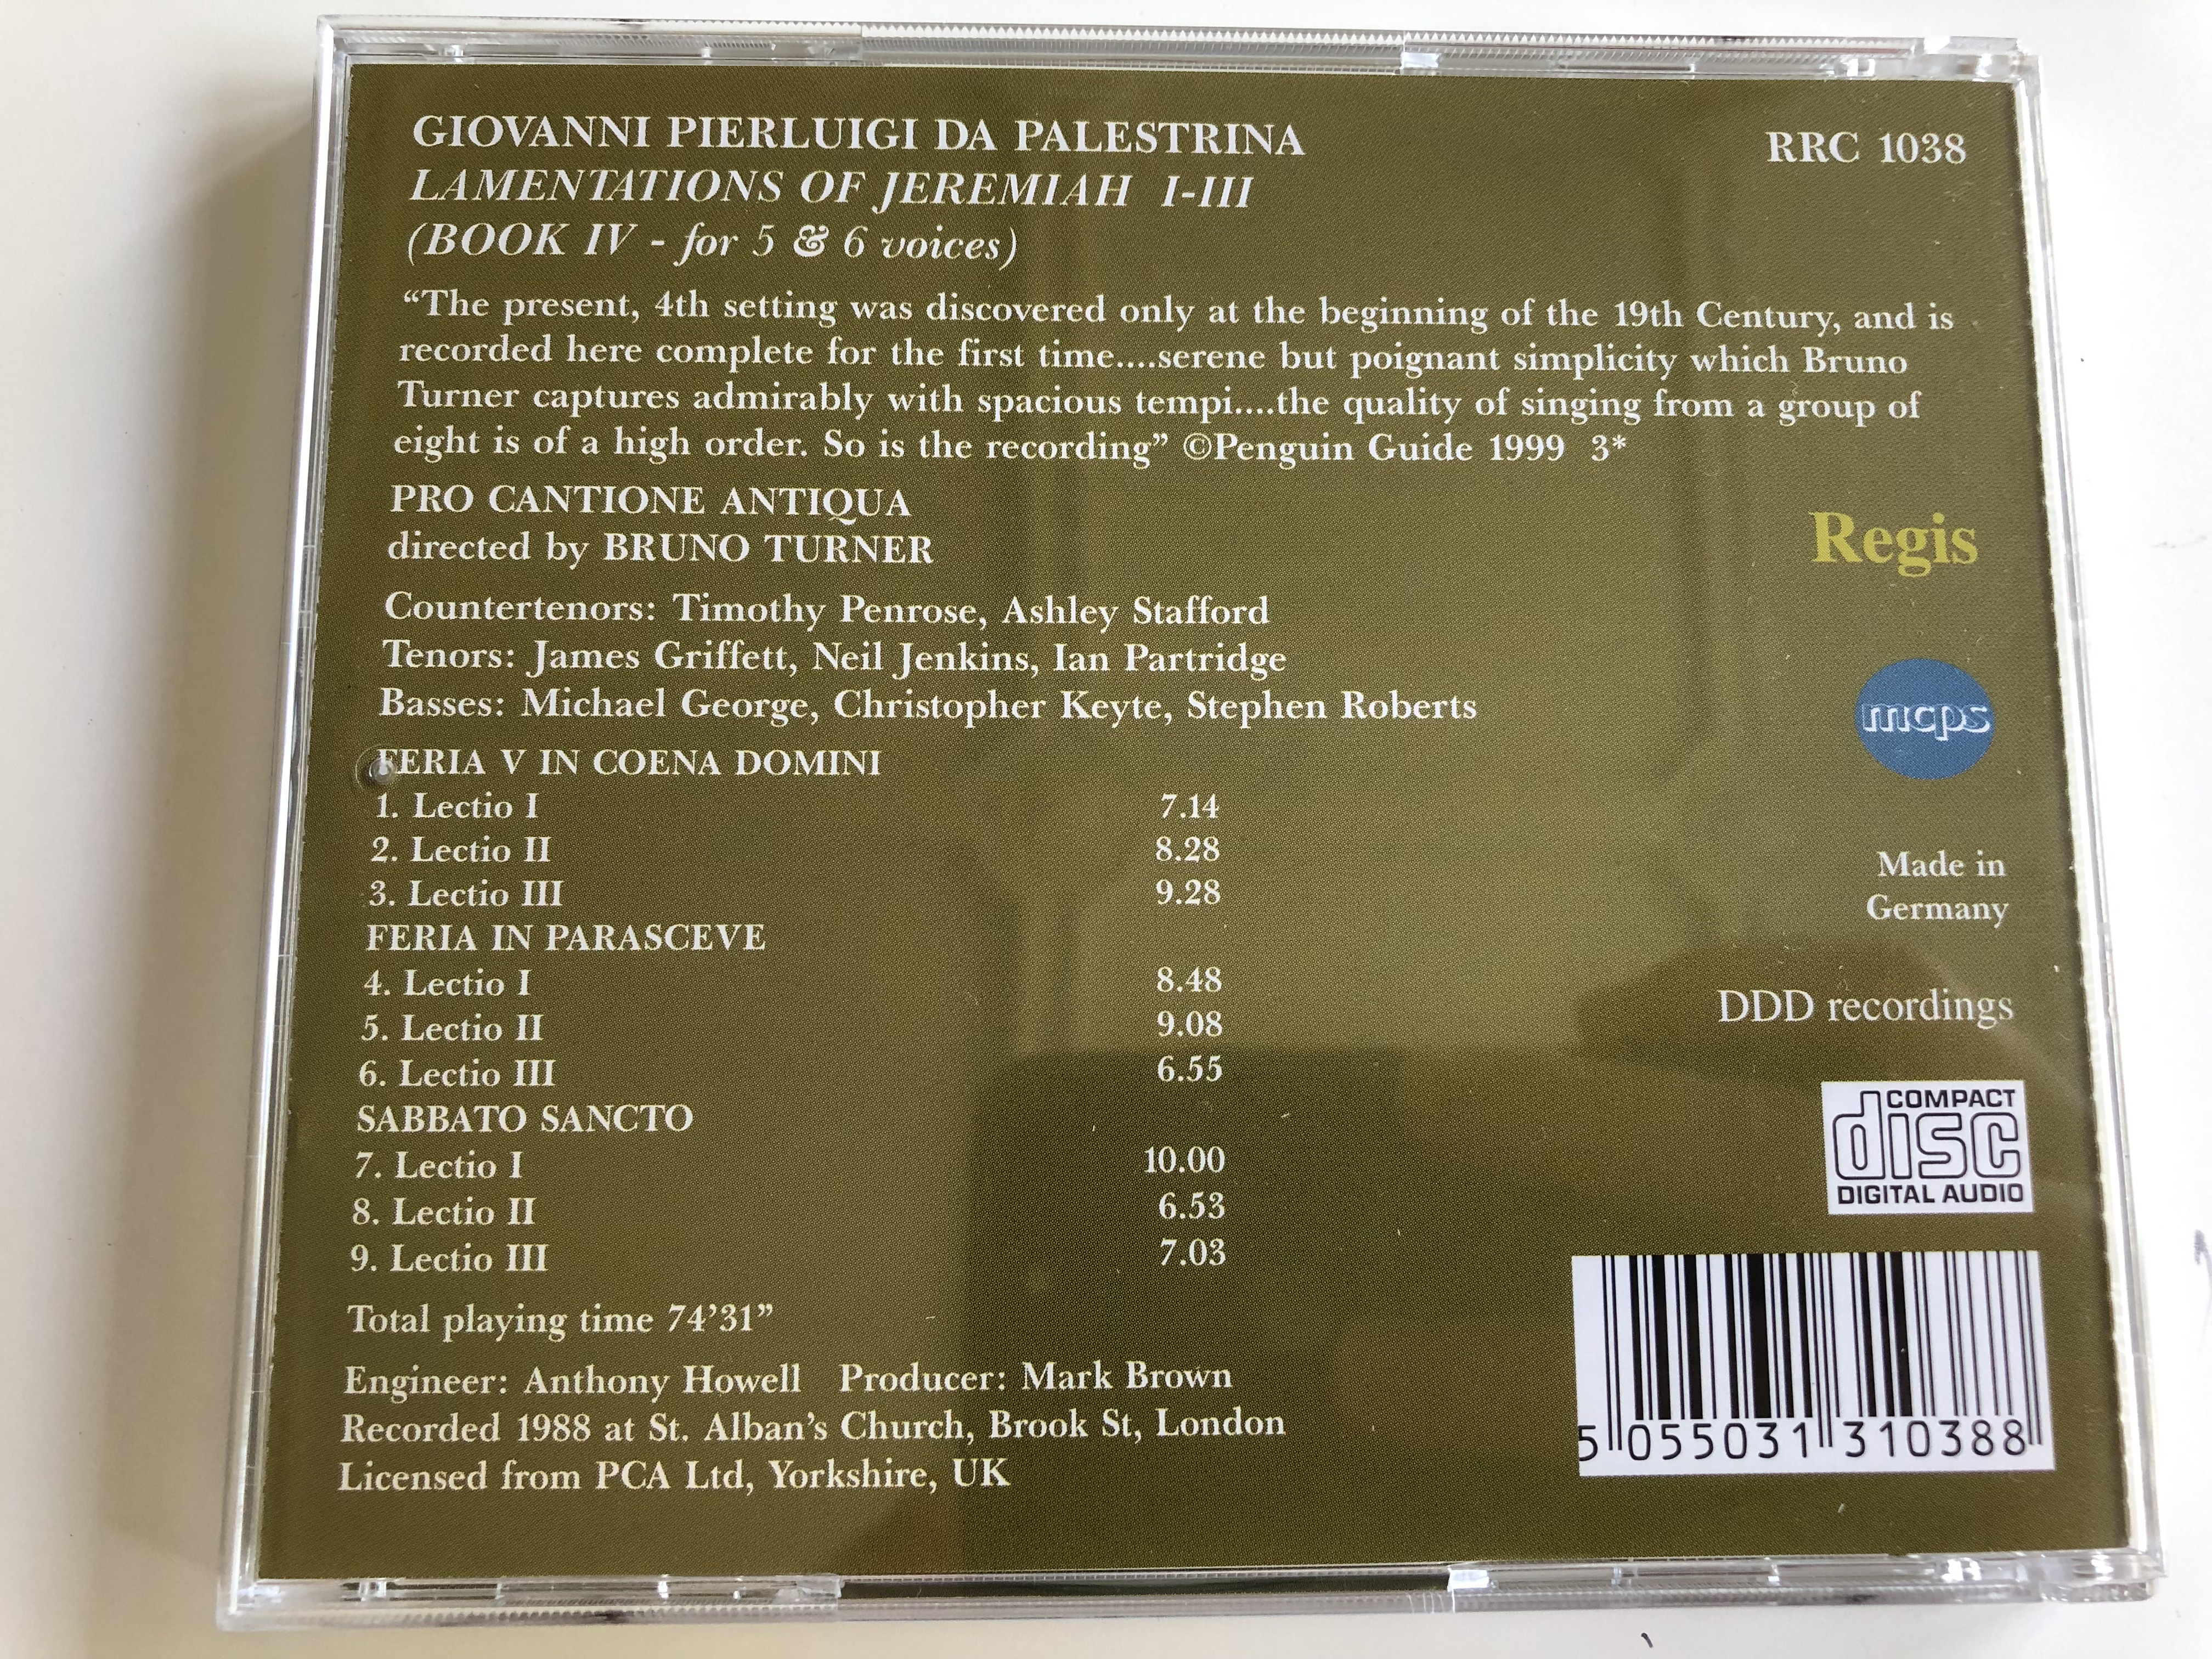 palestrina-lamentations-of-jeremiah-i-iii-book-iv-for-5-6-voices-pro-cantione-antiqua-bruno-turner-rrc-1038-audio-cd-1988-9-.jpg